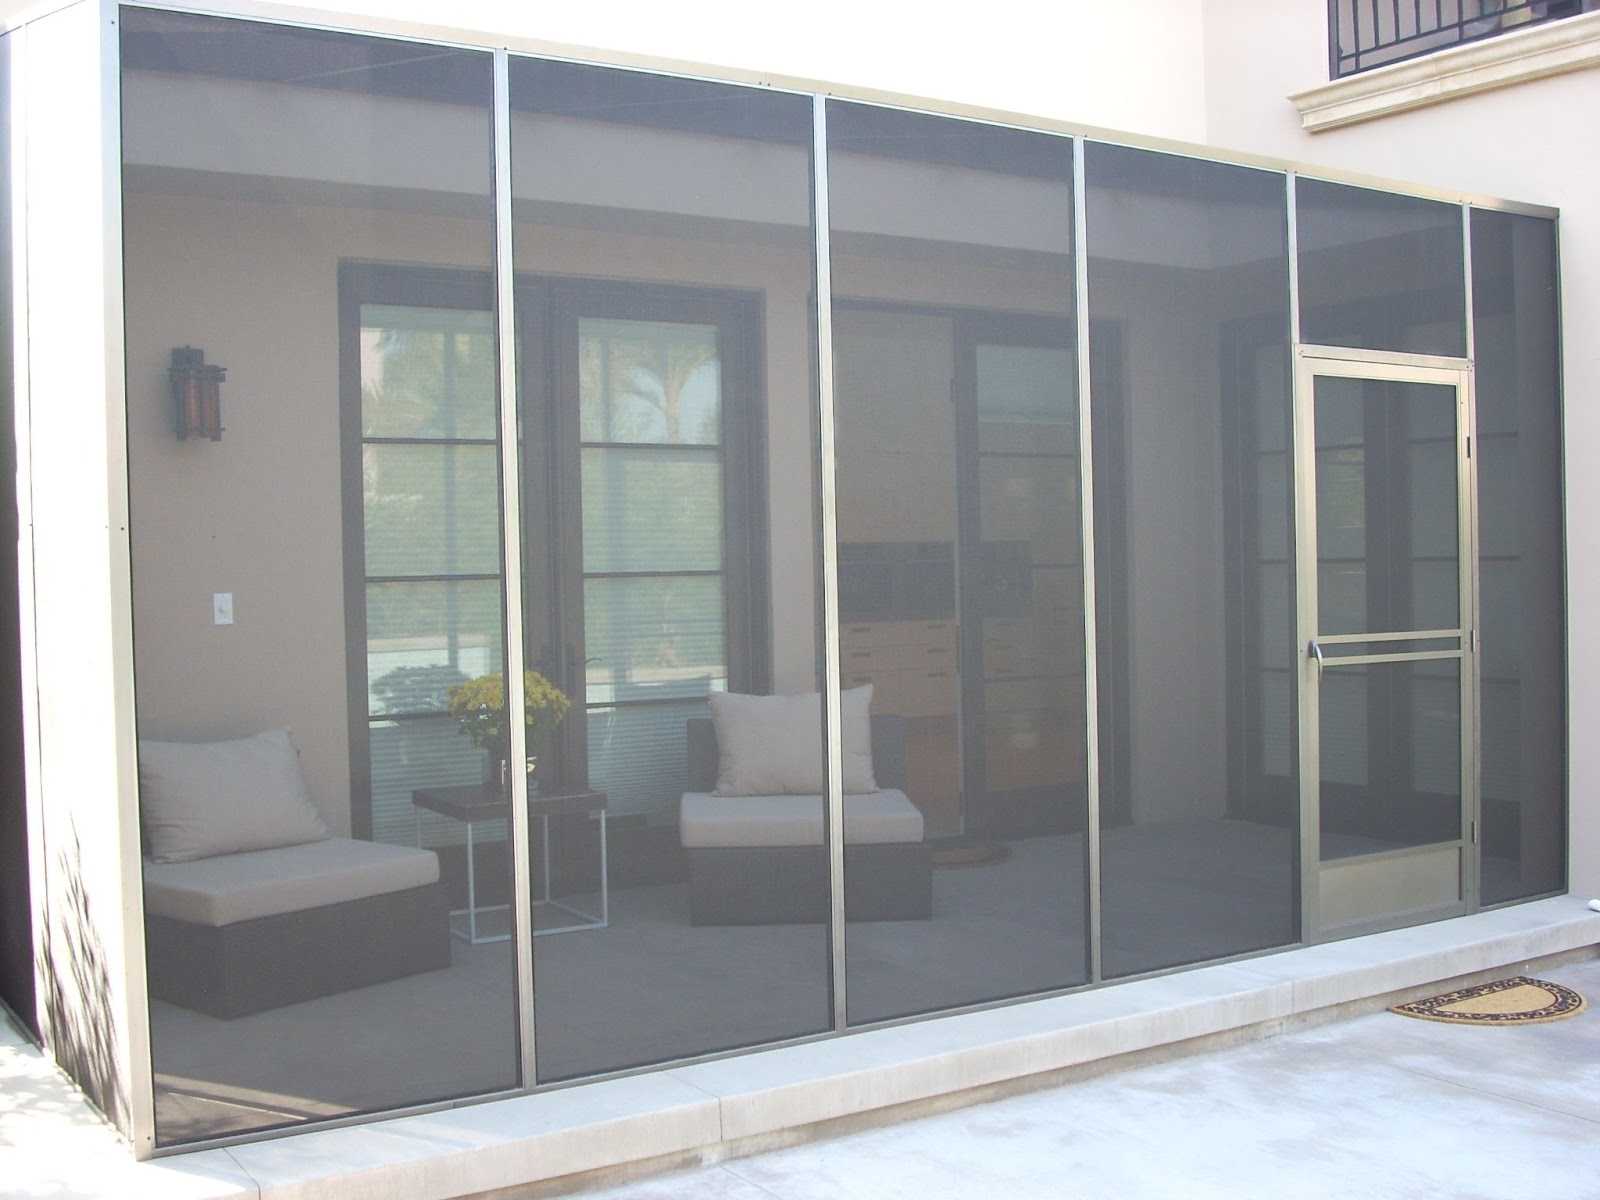 See into a porch/patio area which is totally enclosed by window screens that extend across the whole back of the house 